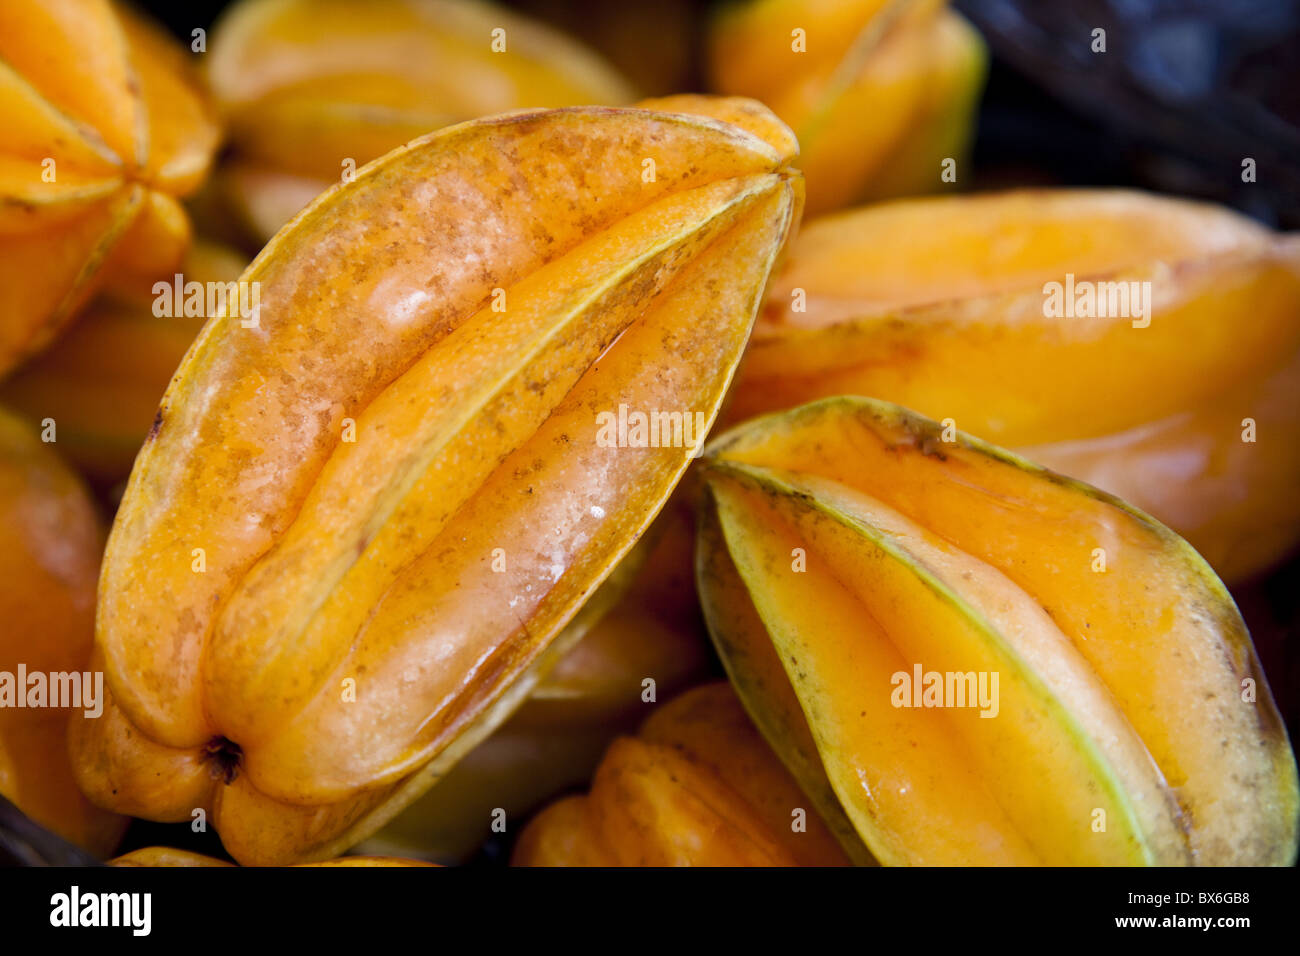 Starfruit (carambola) (Averrhoa carambola), a star shaped fruit when cut, grown in tropical conditions Stock Photo